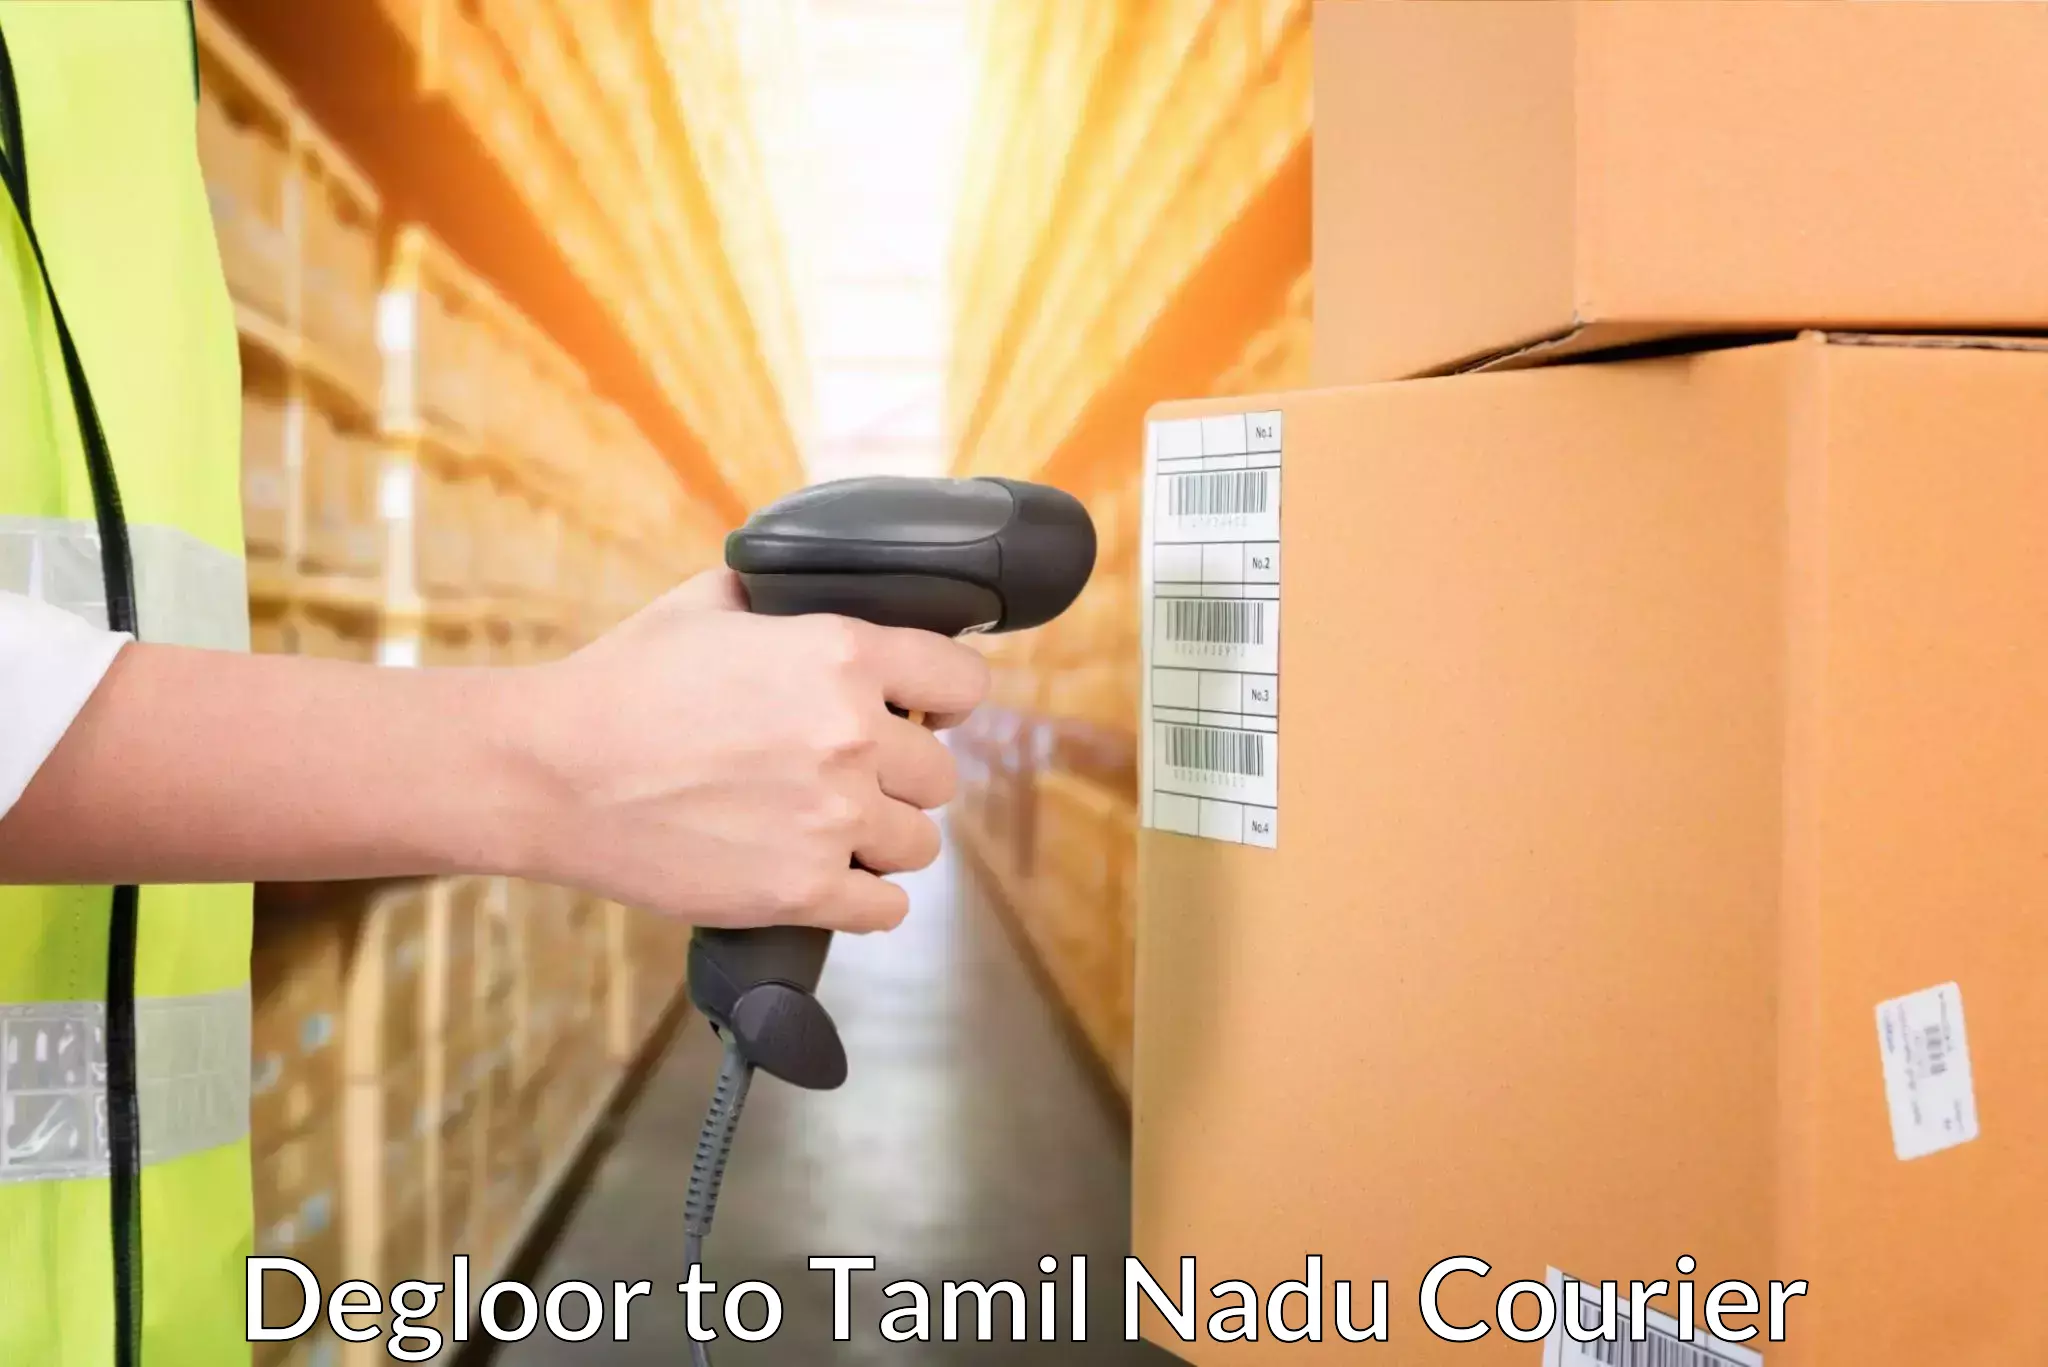 Courier service innovation in Degloor to Mylapore